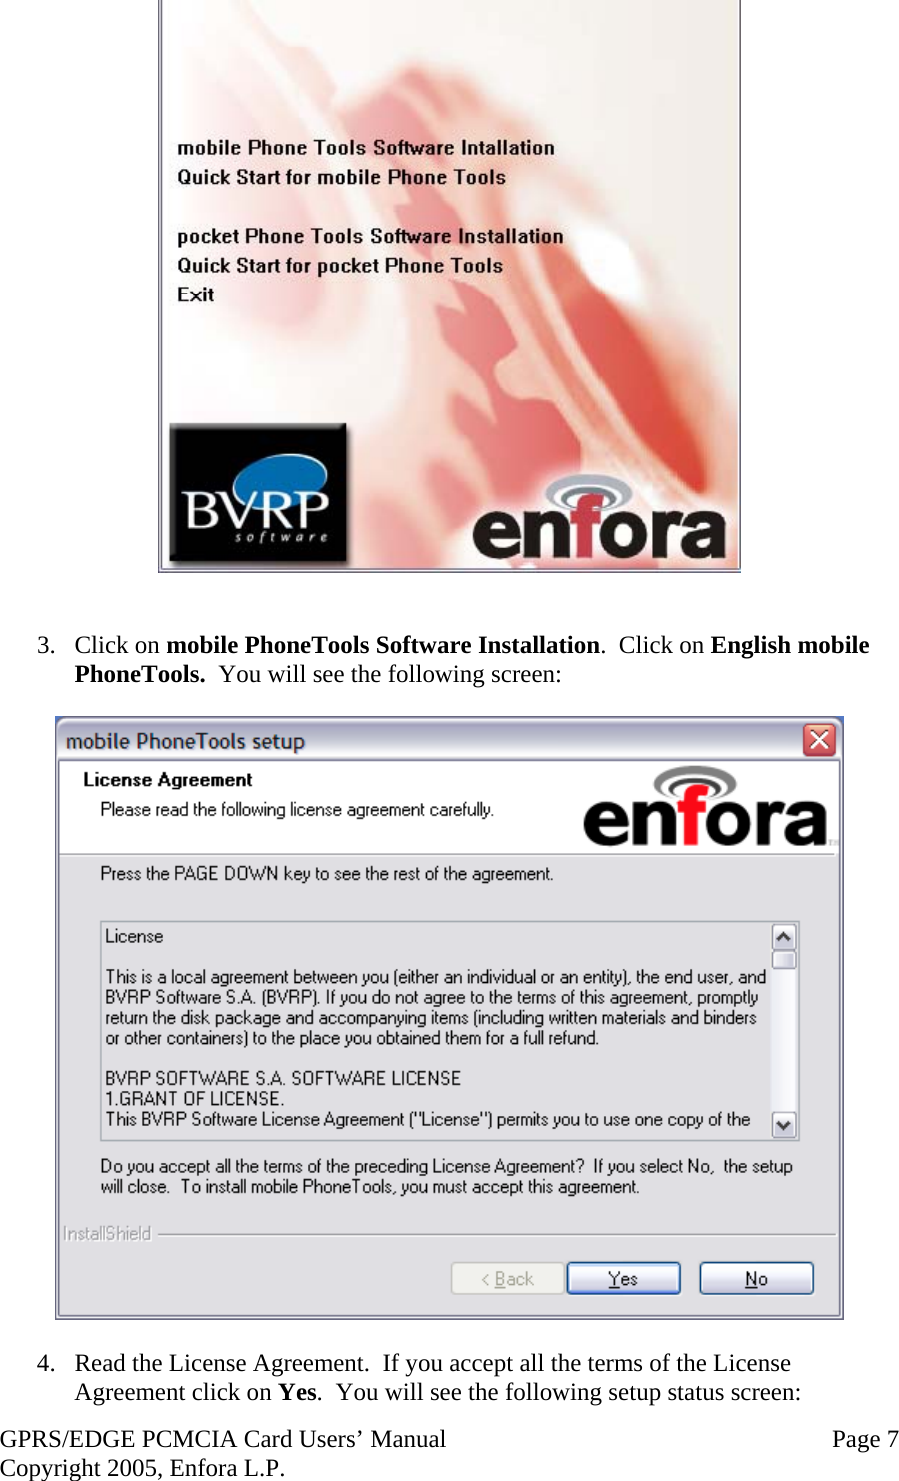 GPRS/EDGE PCMCIA Card Users’ Manual   Page 7 Copyright 2005, Enfora L.P.    3. Click on mobile PhoneTools Software Installation.  Click on English mobile PhoneTools.  You will see the following screen:    4.  Read the License Agreement.  If you accept all the terms of the License Agreement click on Yes.  You will see the following setup status screen: 